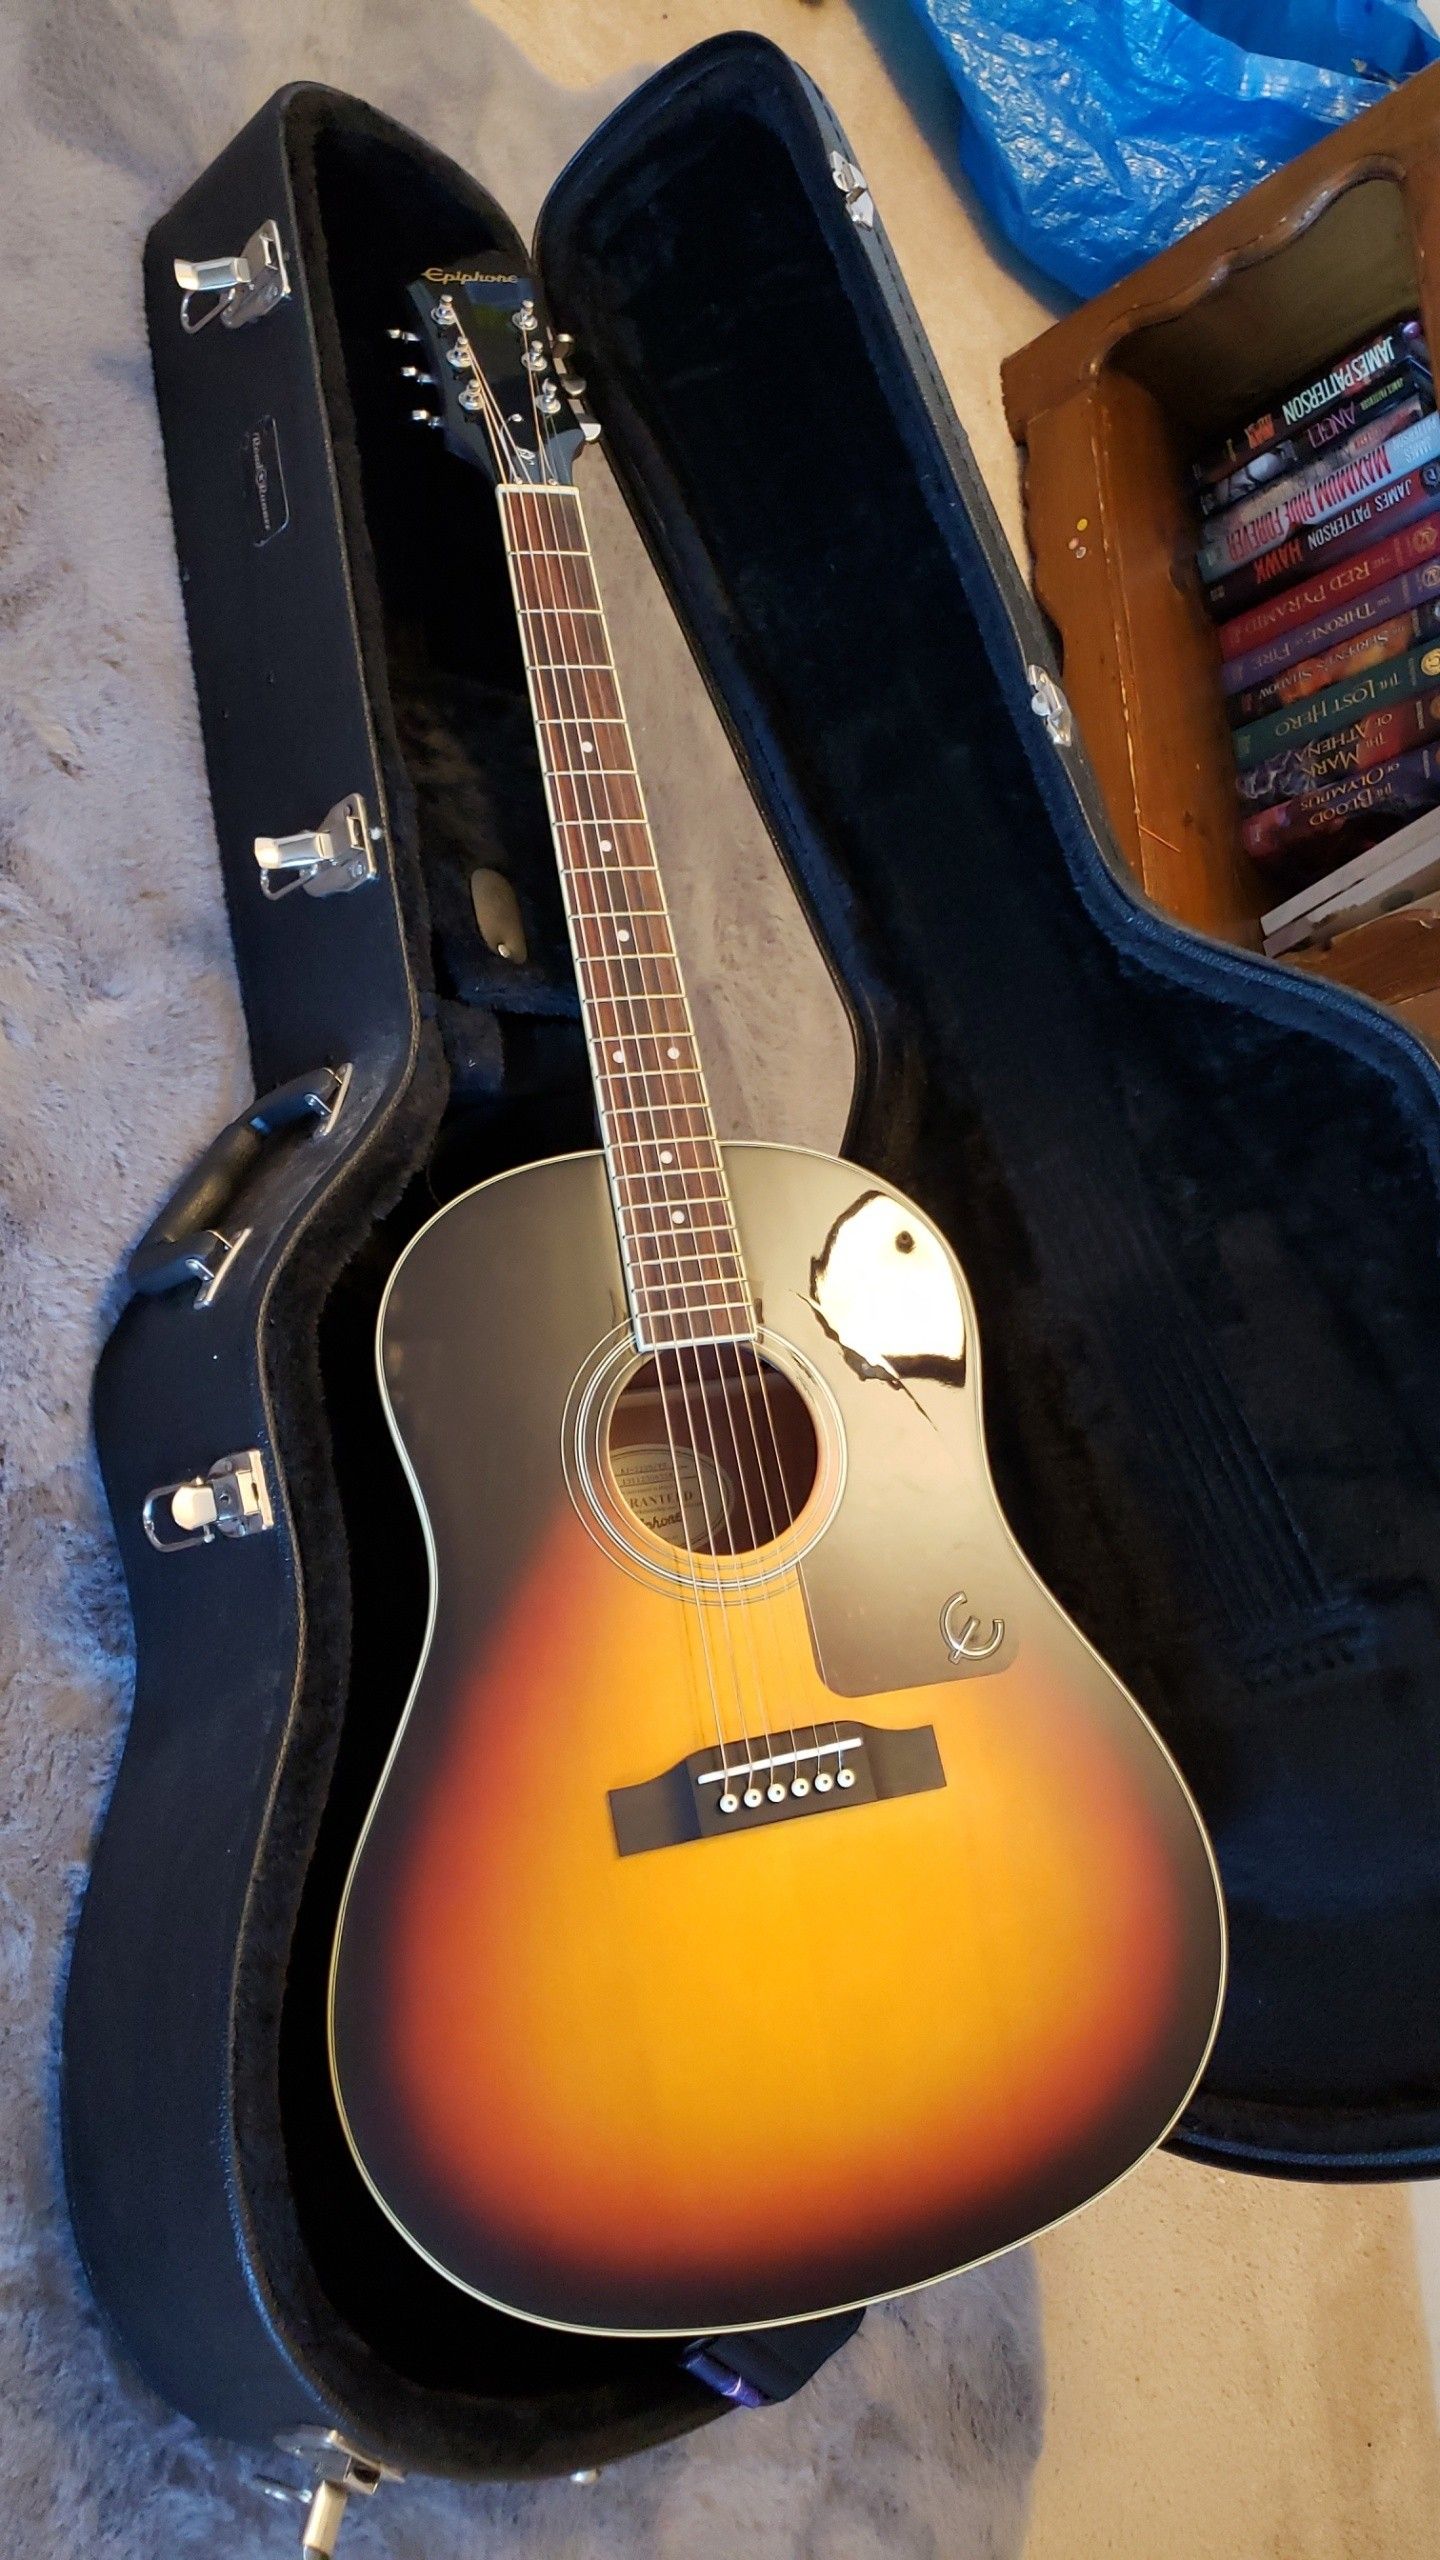 Epiphone Acoustic Guitar and Case